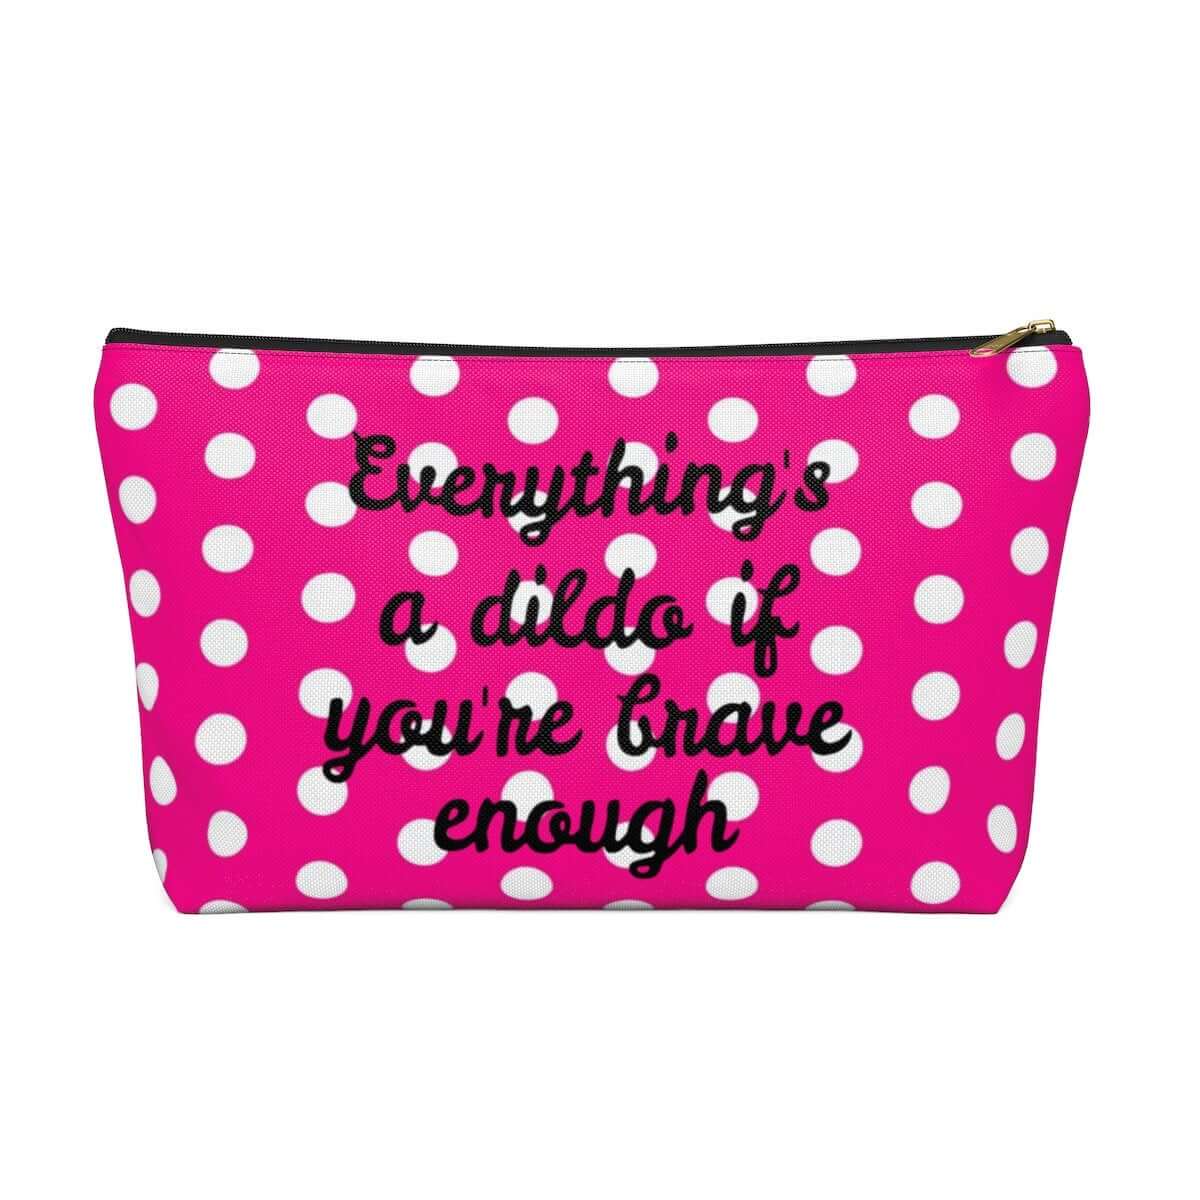 Sex toy bag for vibrator or dildo. Adult toy storage